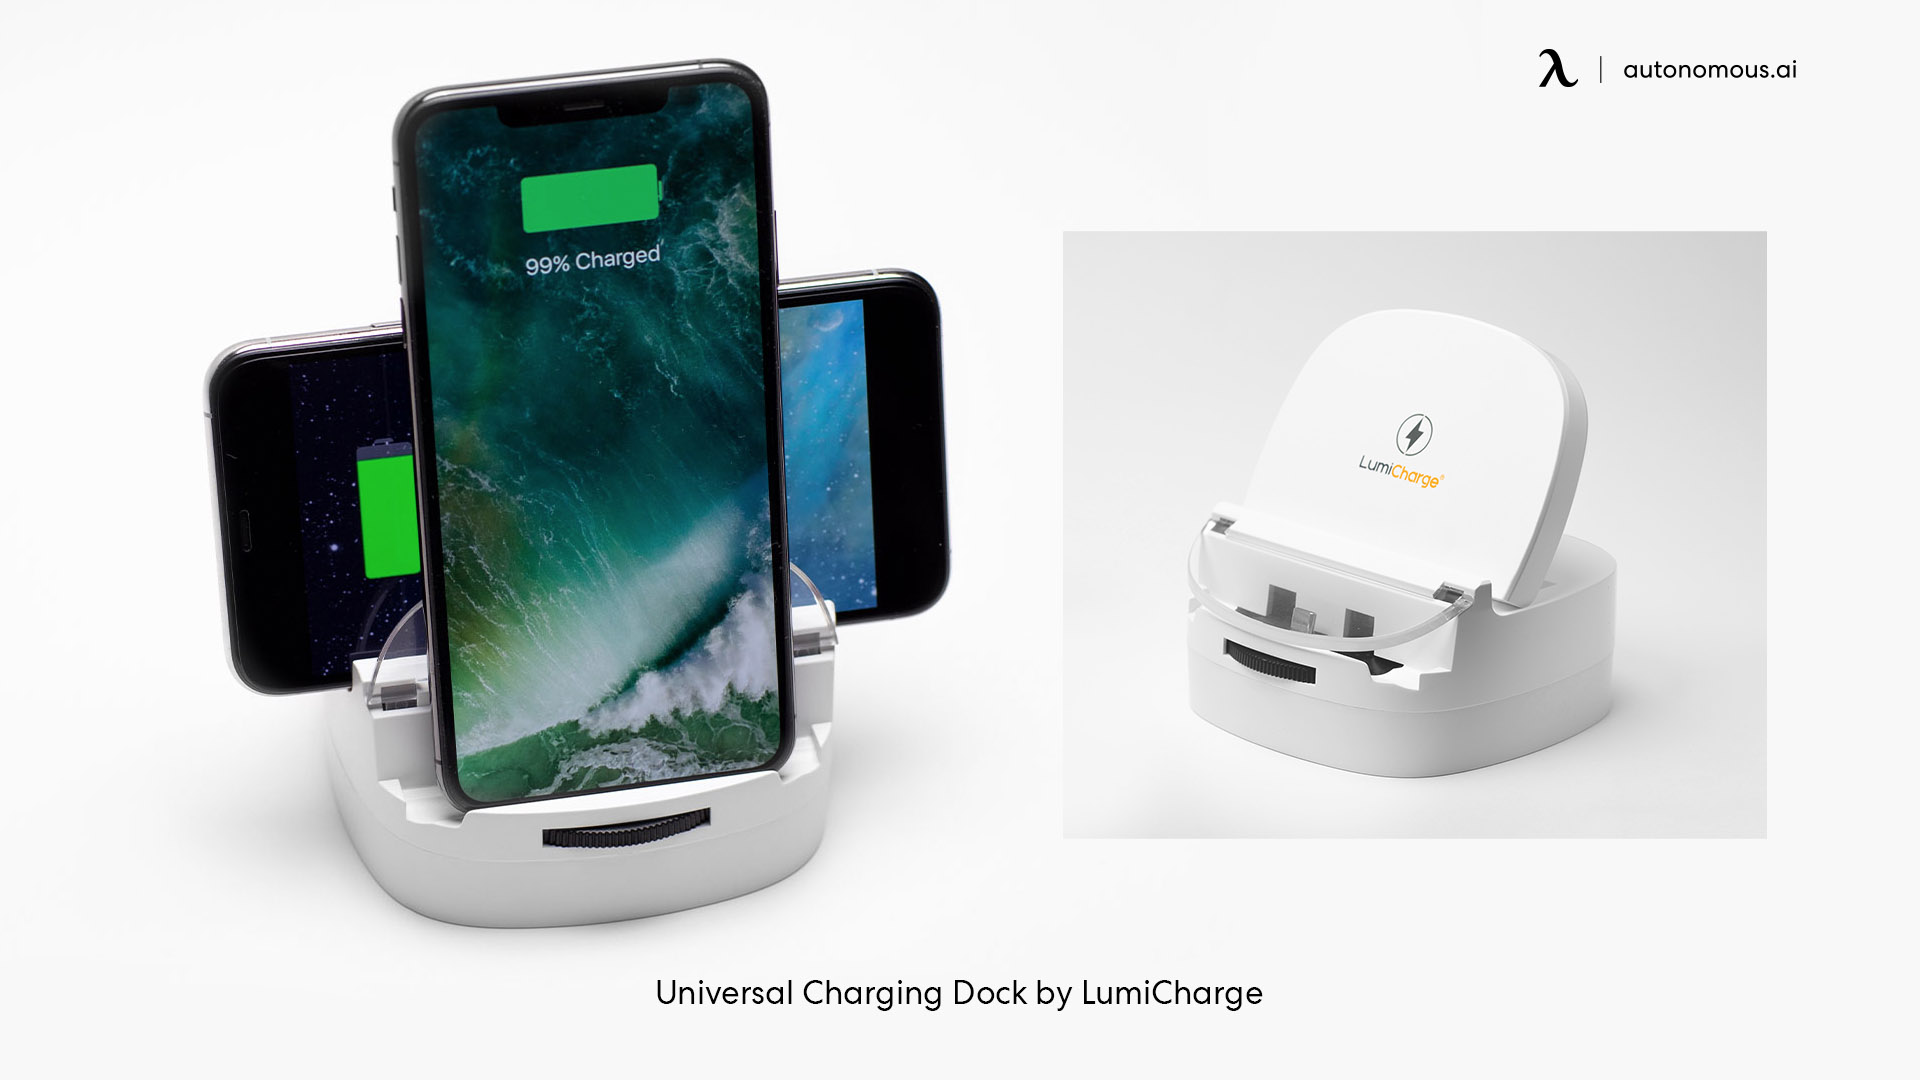 Universal wireless charger for android by LumiCharge